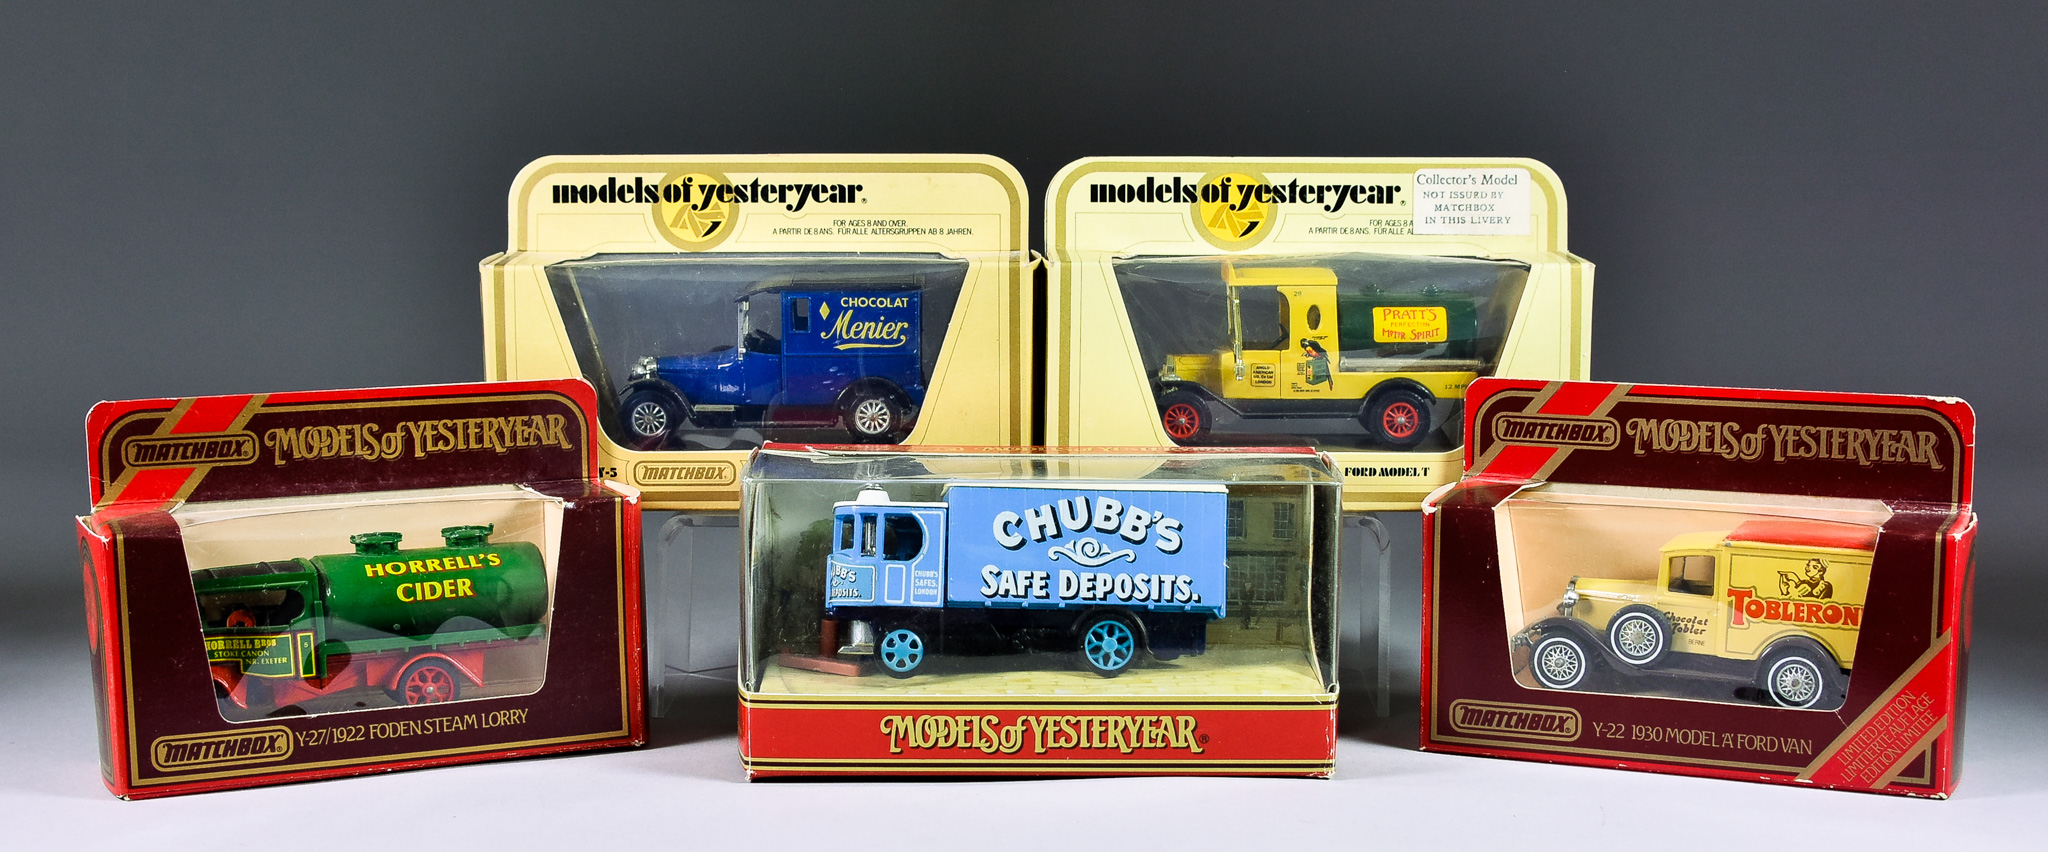 A Large Collection of Matchbox Models of Yesteryear including - 1929 Garrett Steam Wagon (Y-37B),